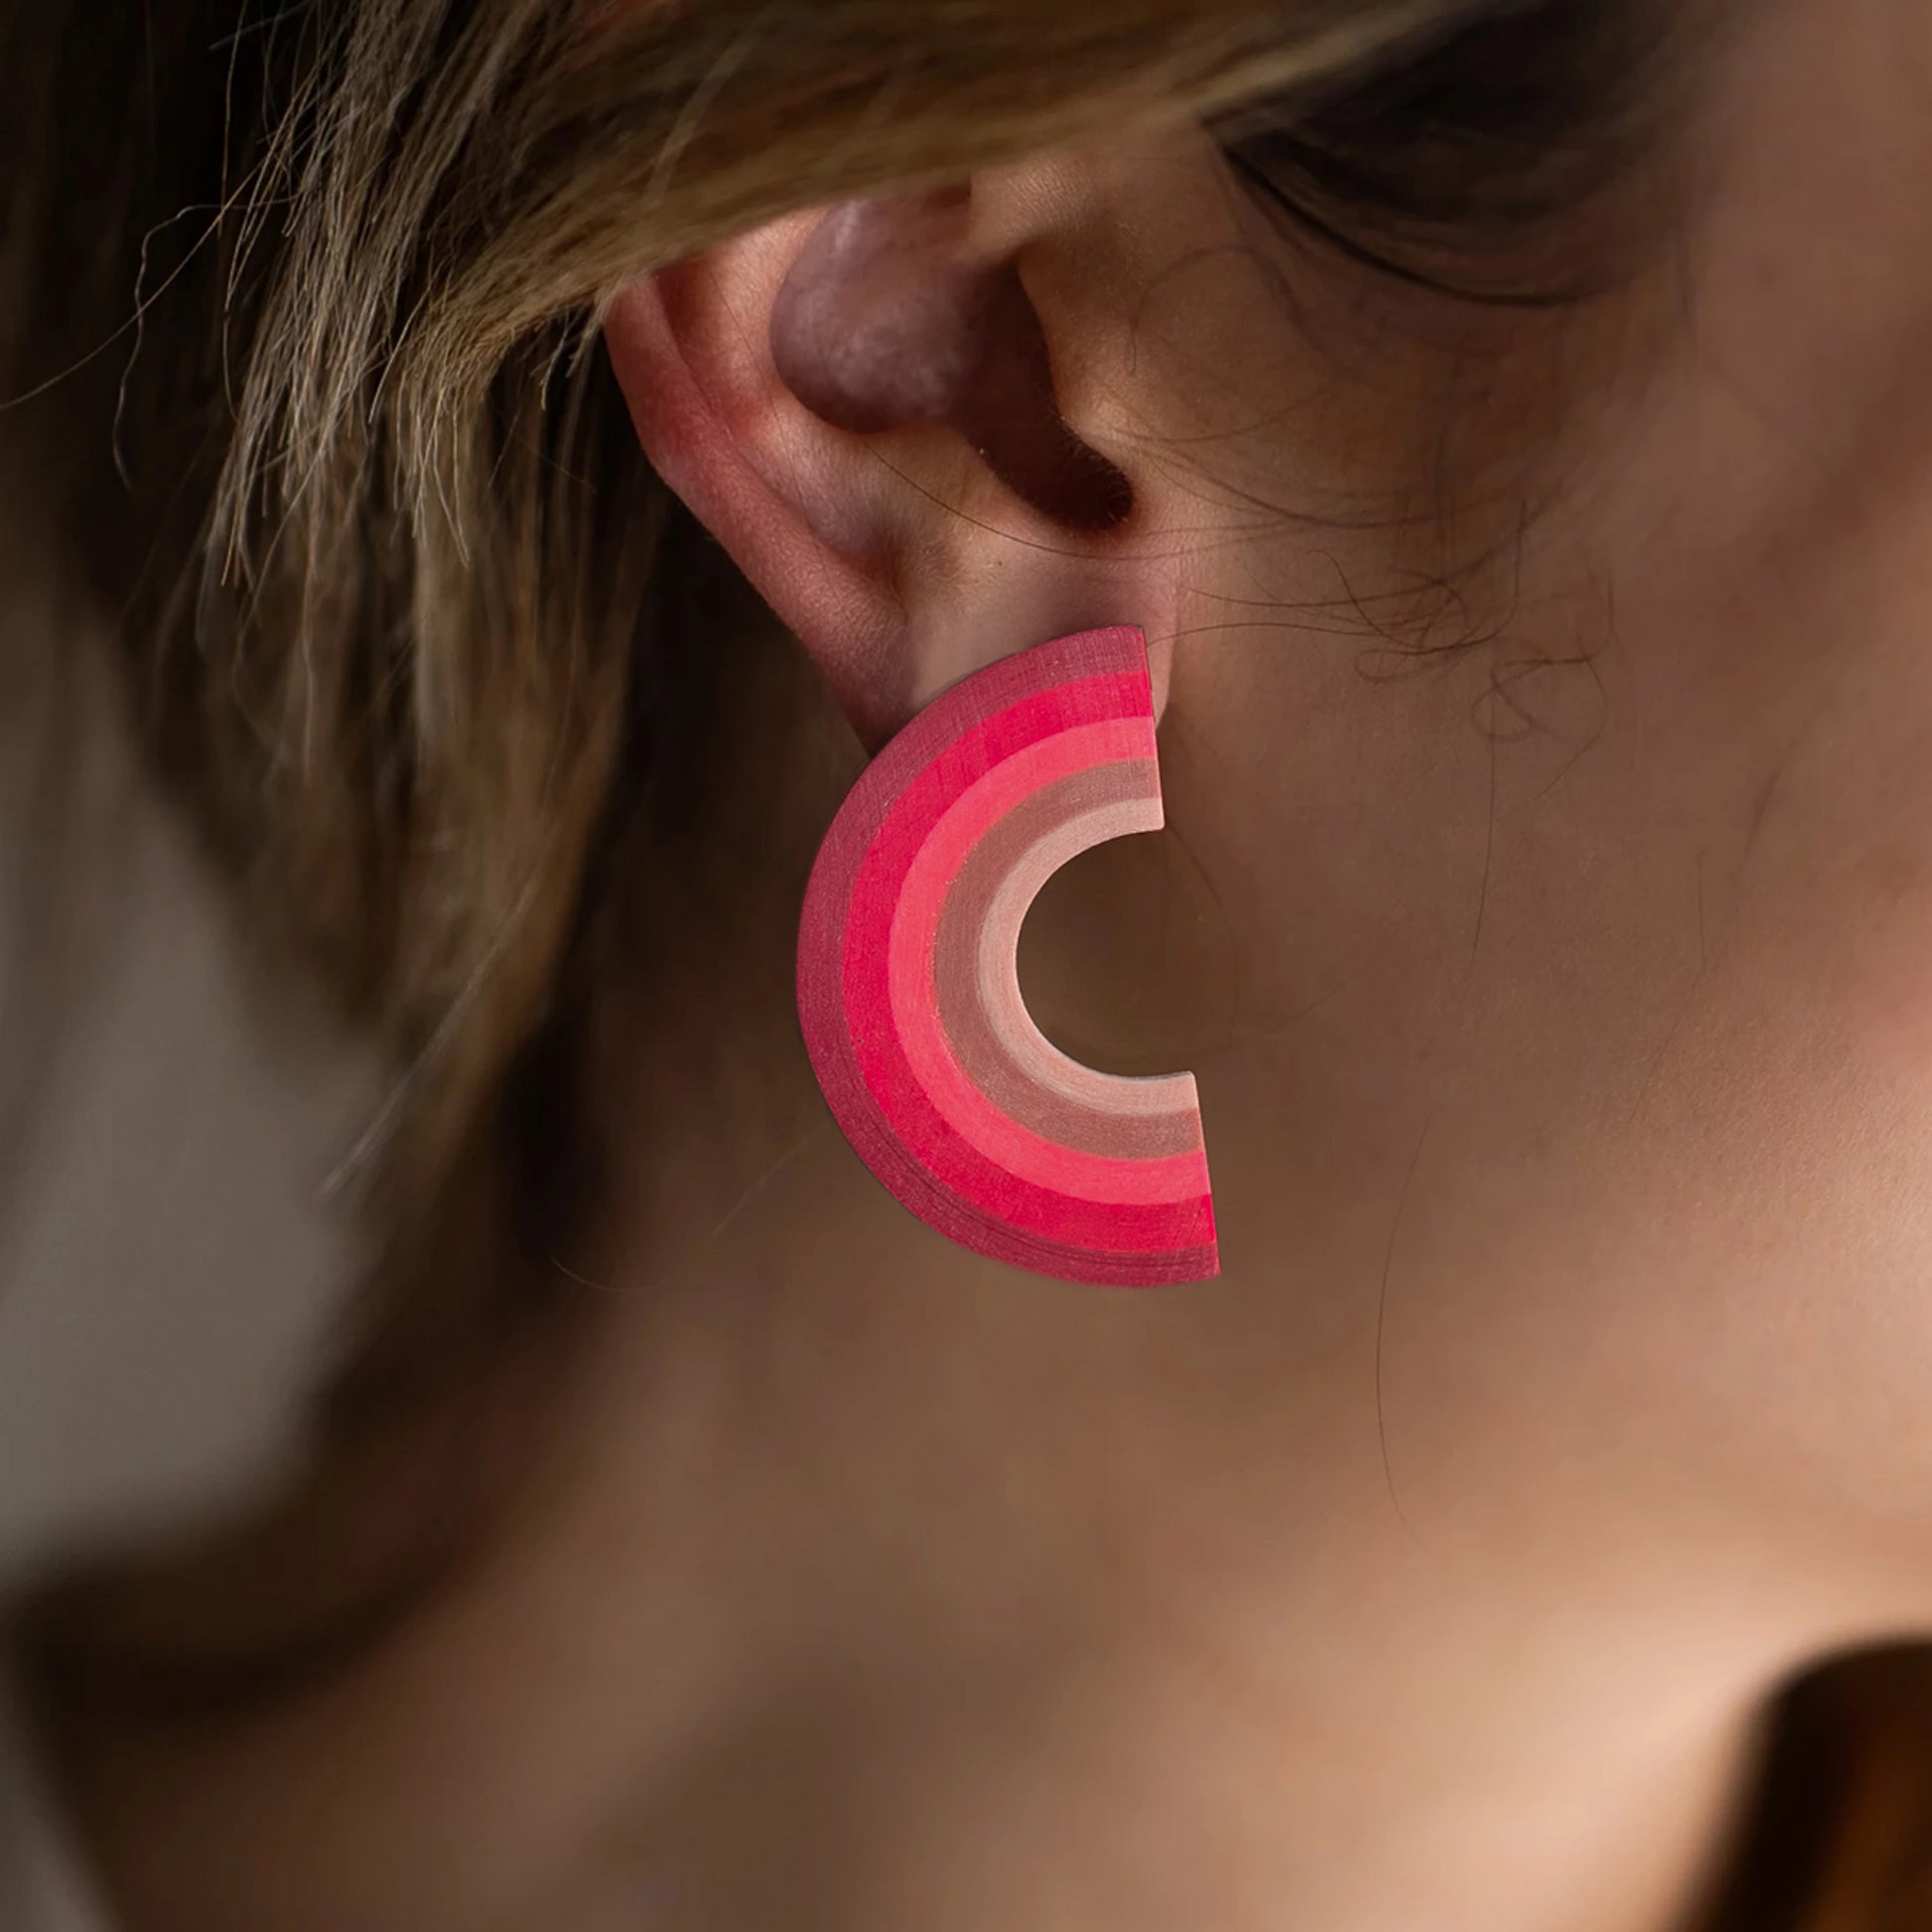 Earrings made from compressed paper with a titanium stud on model's ear.